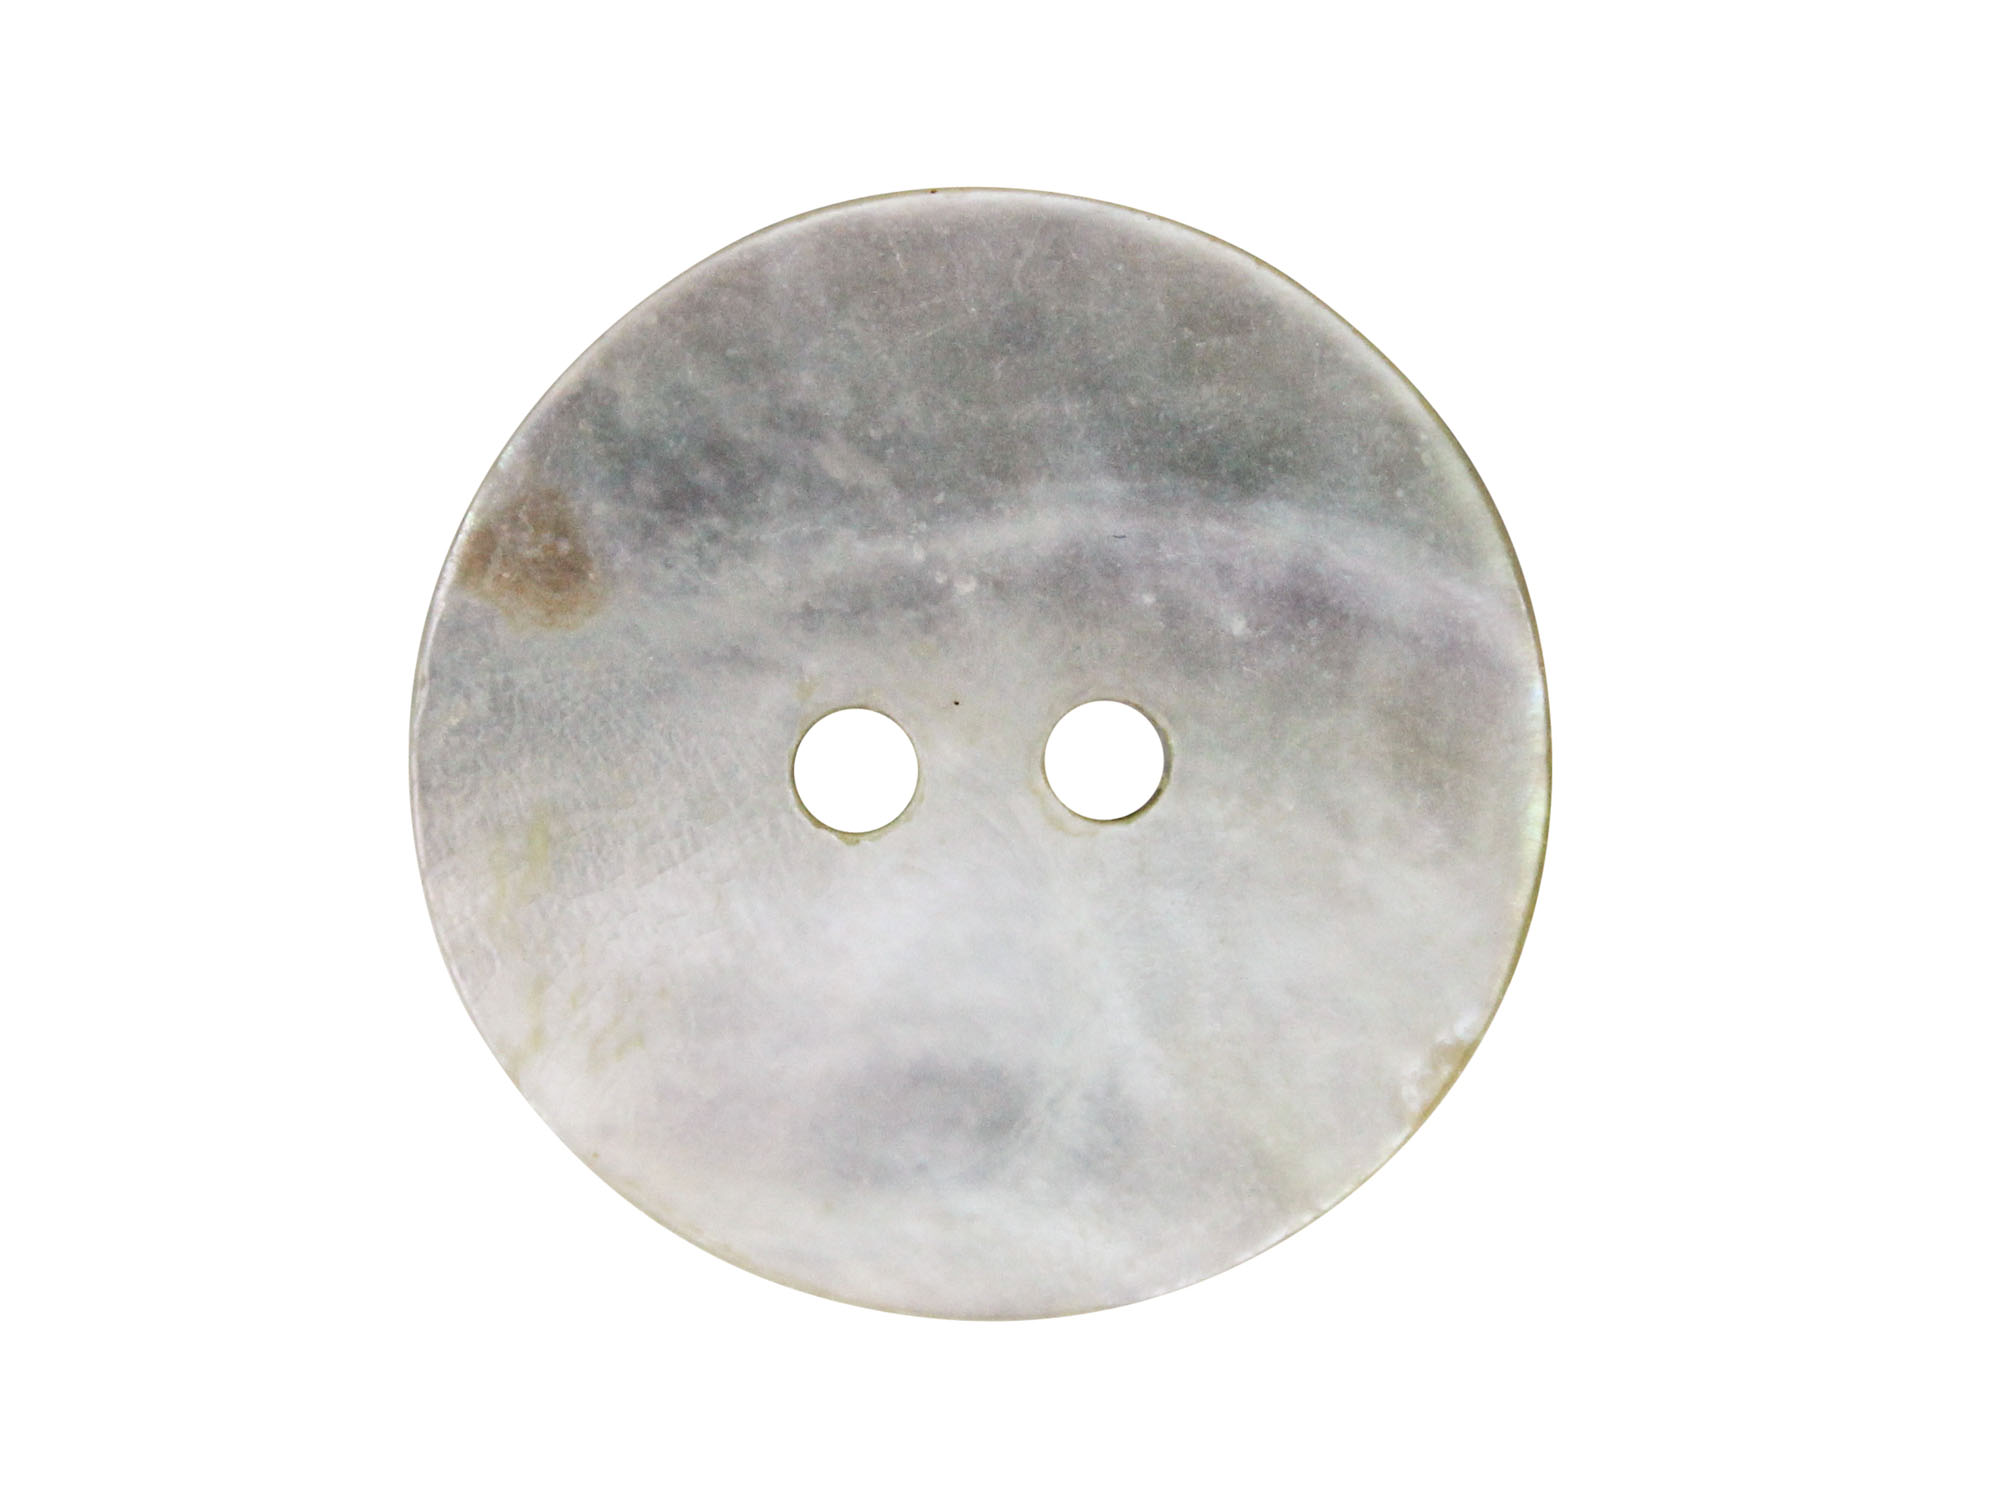 Akoya Mother of Pearl Button: 28L (17.8mm or 0.701") mother-of-pearl buttons